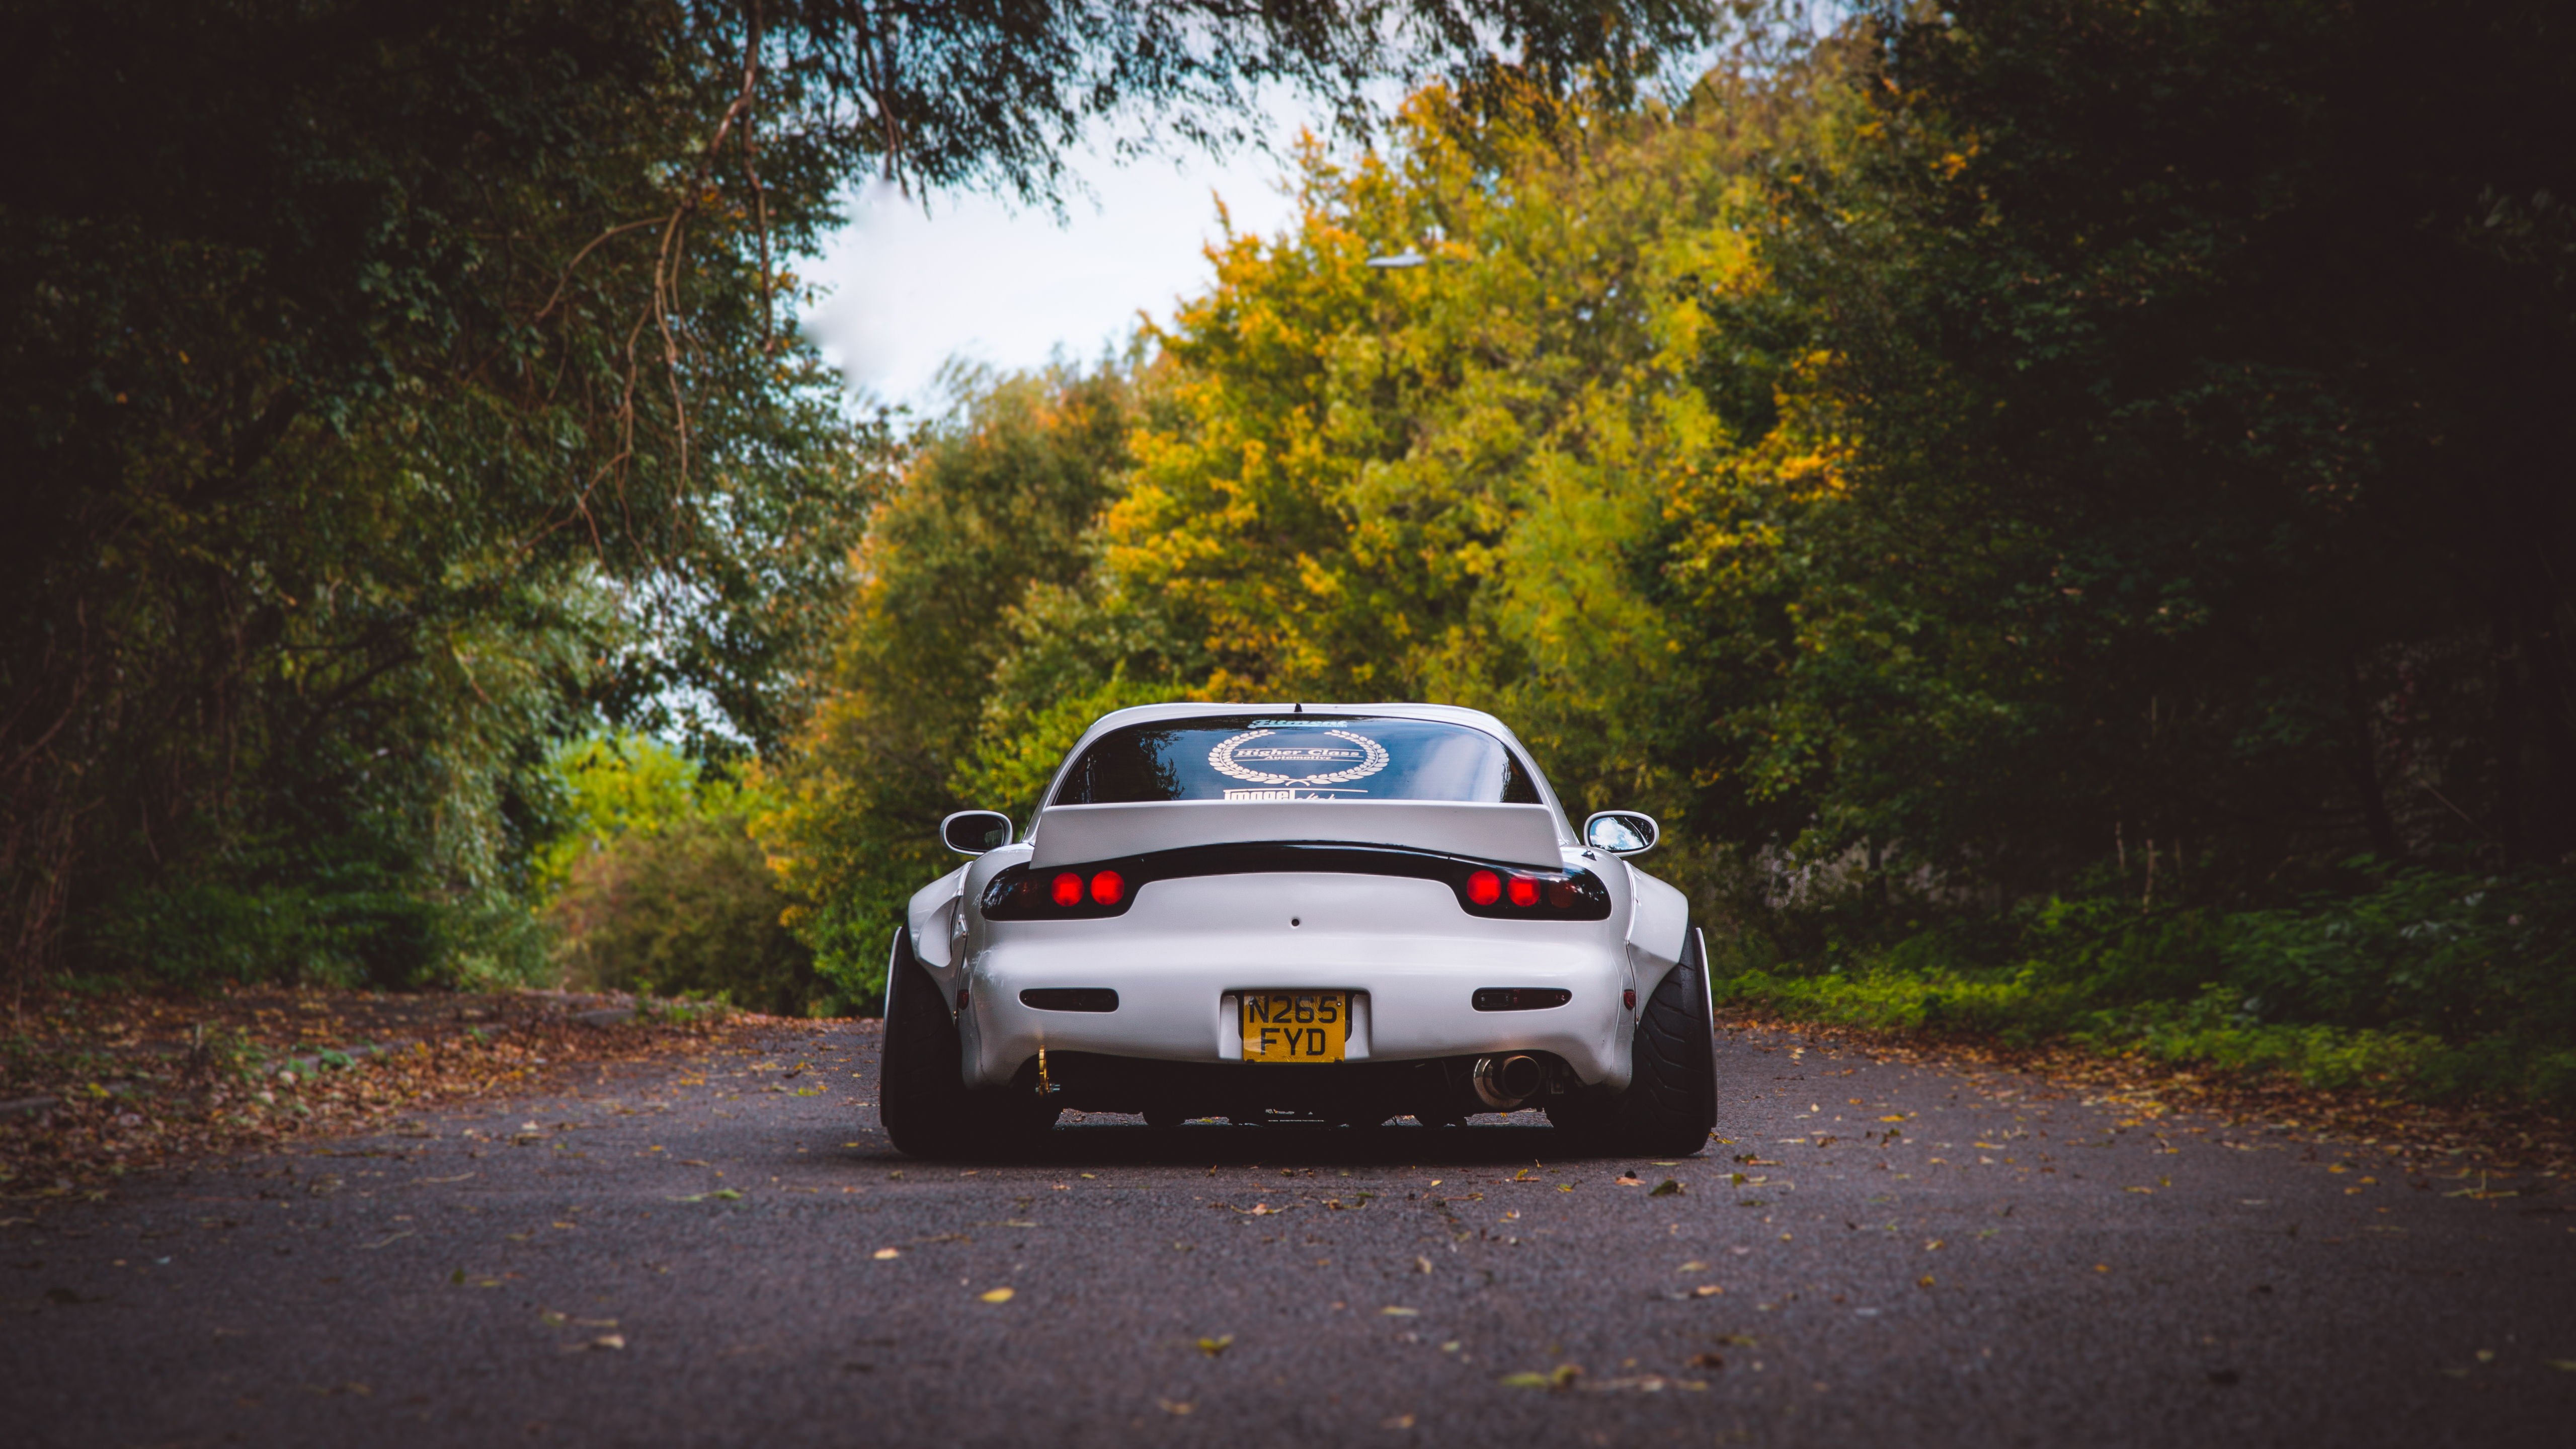 Mazda RX 7 Car Vehicle Tuning JDM Road Forest Trees Backlight White Cars Widebody Mazda 5120x2880